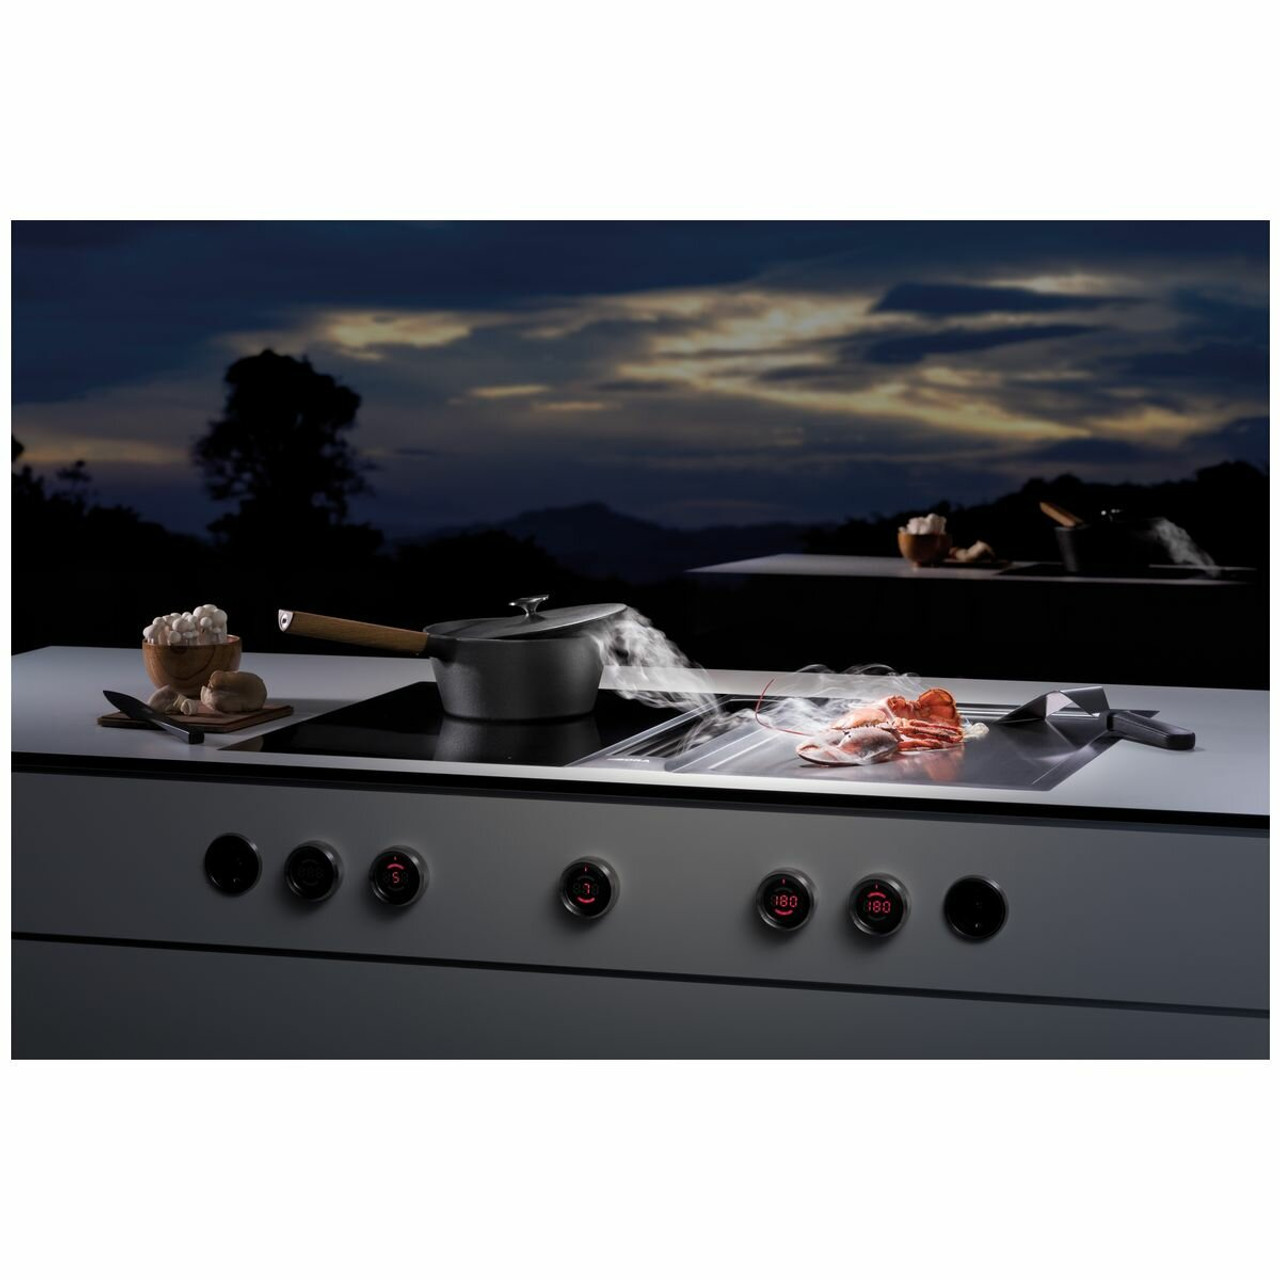 CKT - 33cm Classic Teppanyaki 2 Zone Grill Cooktop - Stainless Steel